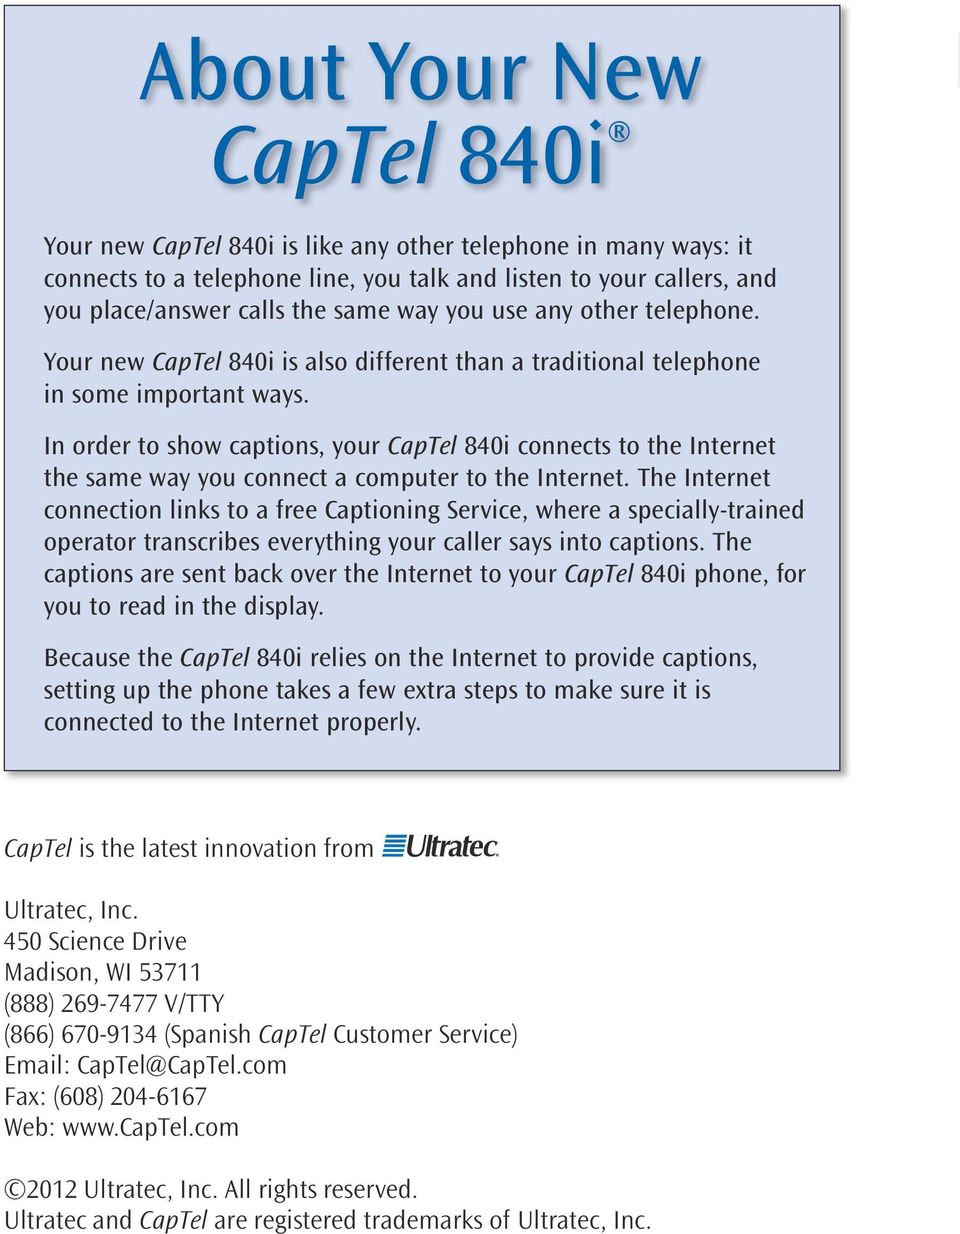 In order to show captions, your CapTel 840i connects to the Internet the same way you connect a computer to the Internet.